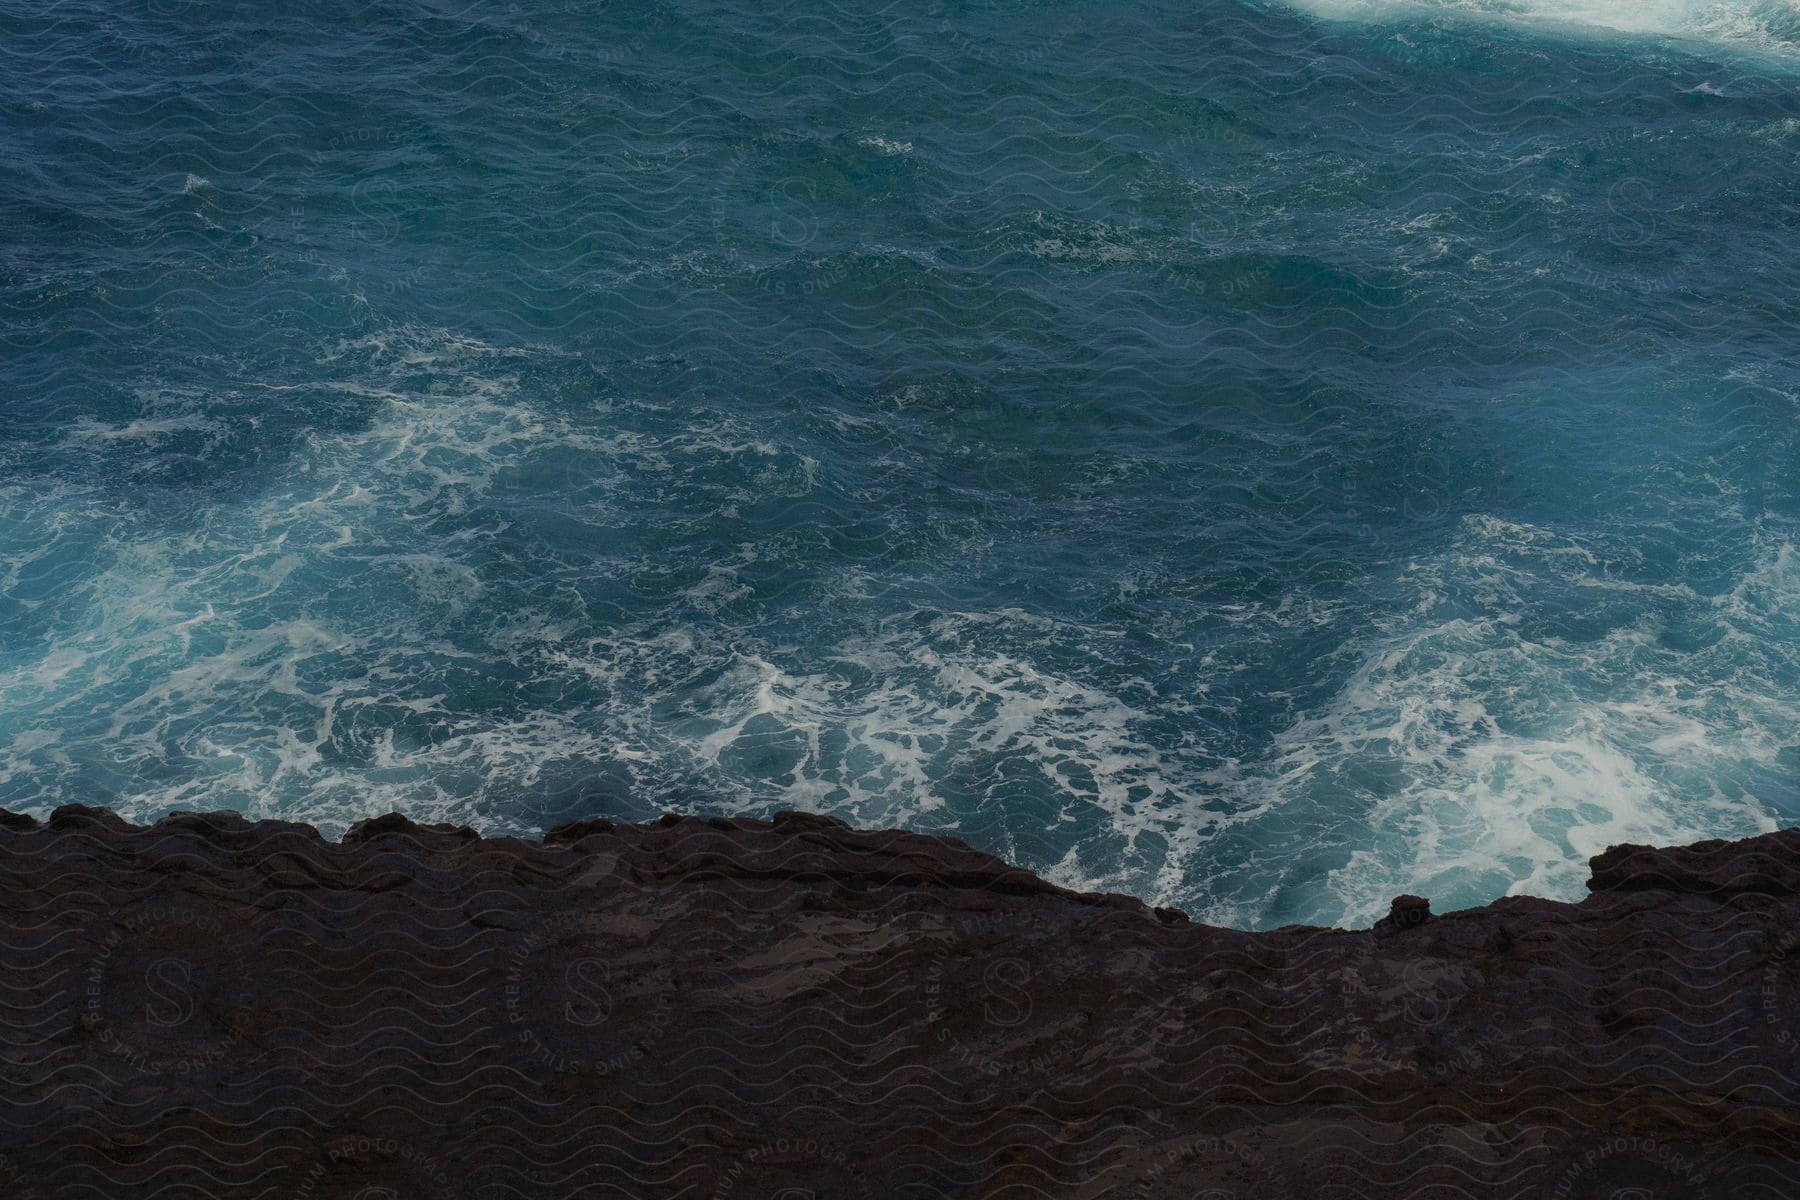 View looking down at a ledge along the coast as waves roll in